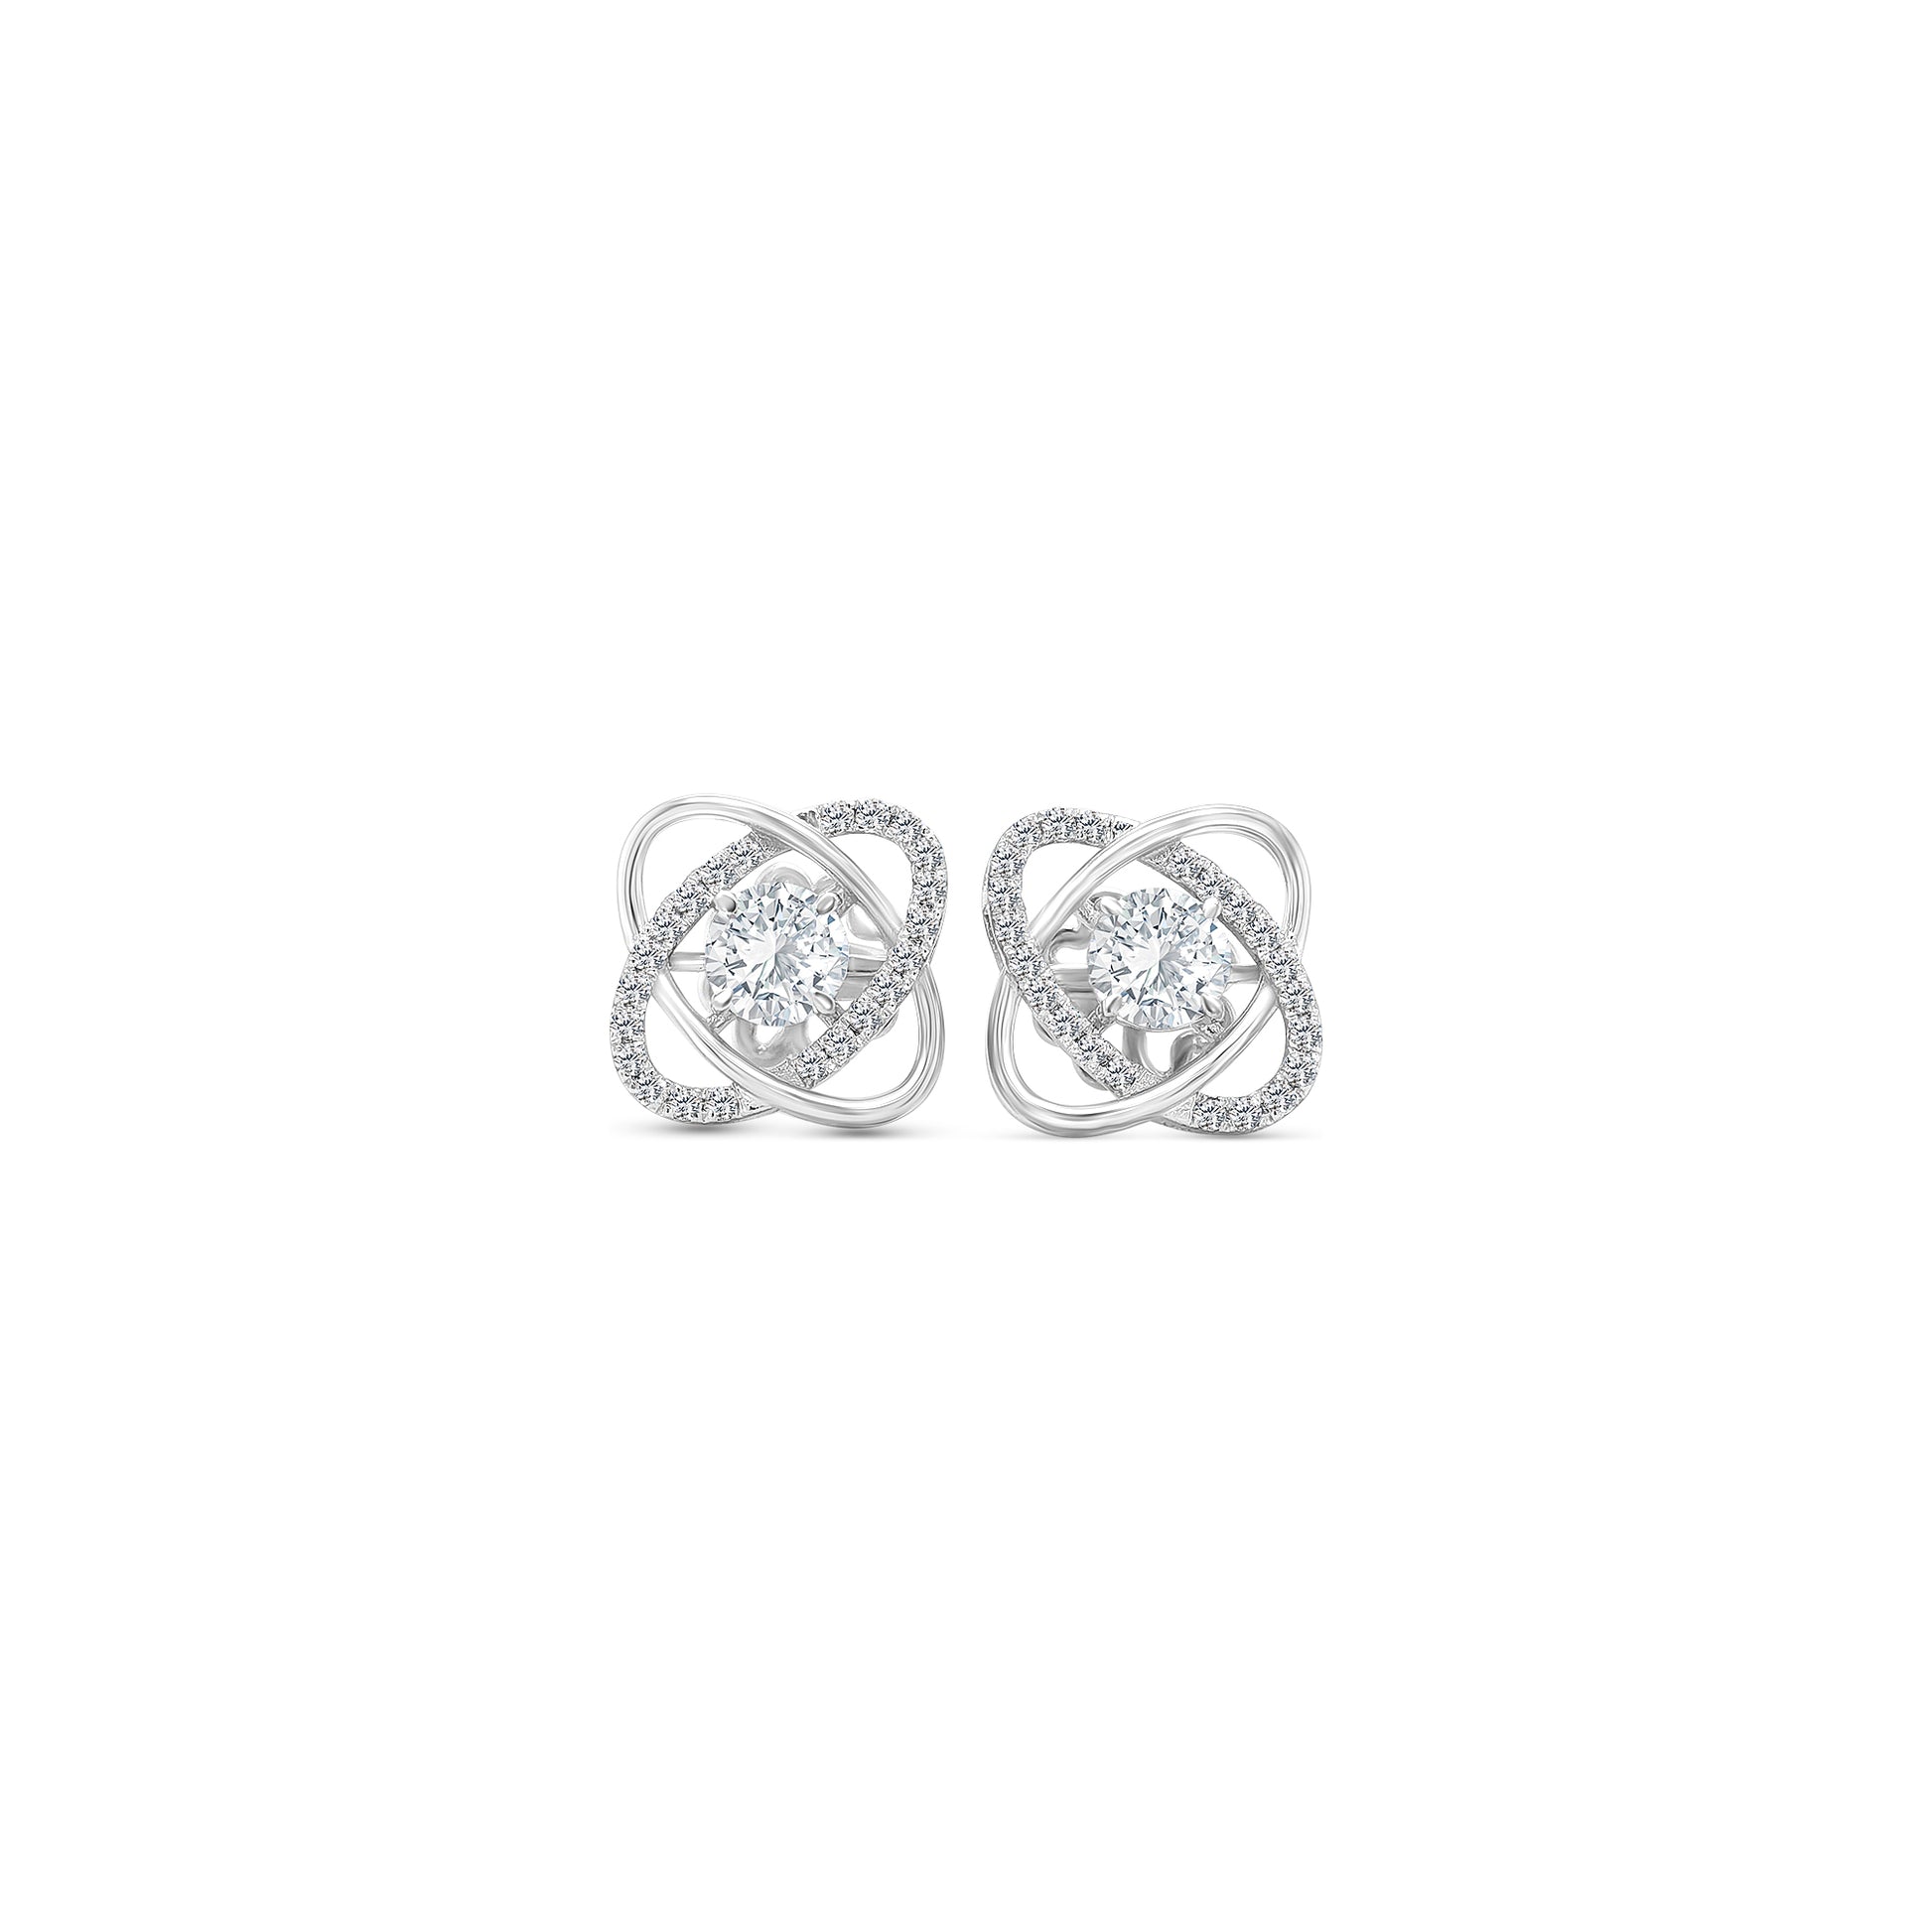 Round brilliant diamond spiral stud earrings, elegant jewelry, sparkling accessories, exquisite craftsmanship, dazzling gems, sophisticated style, luxury fashion, timeless elegance